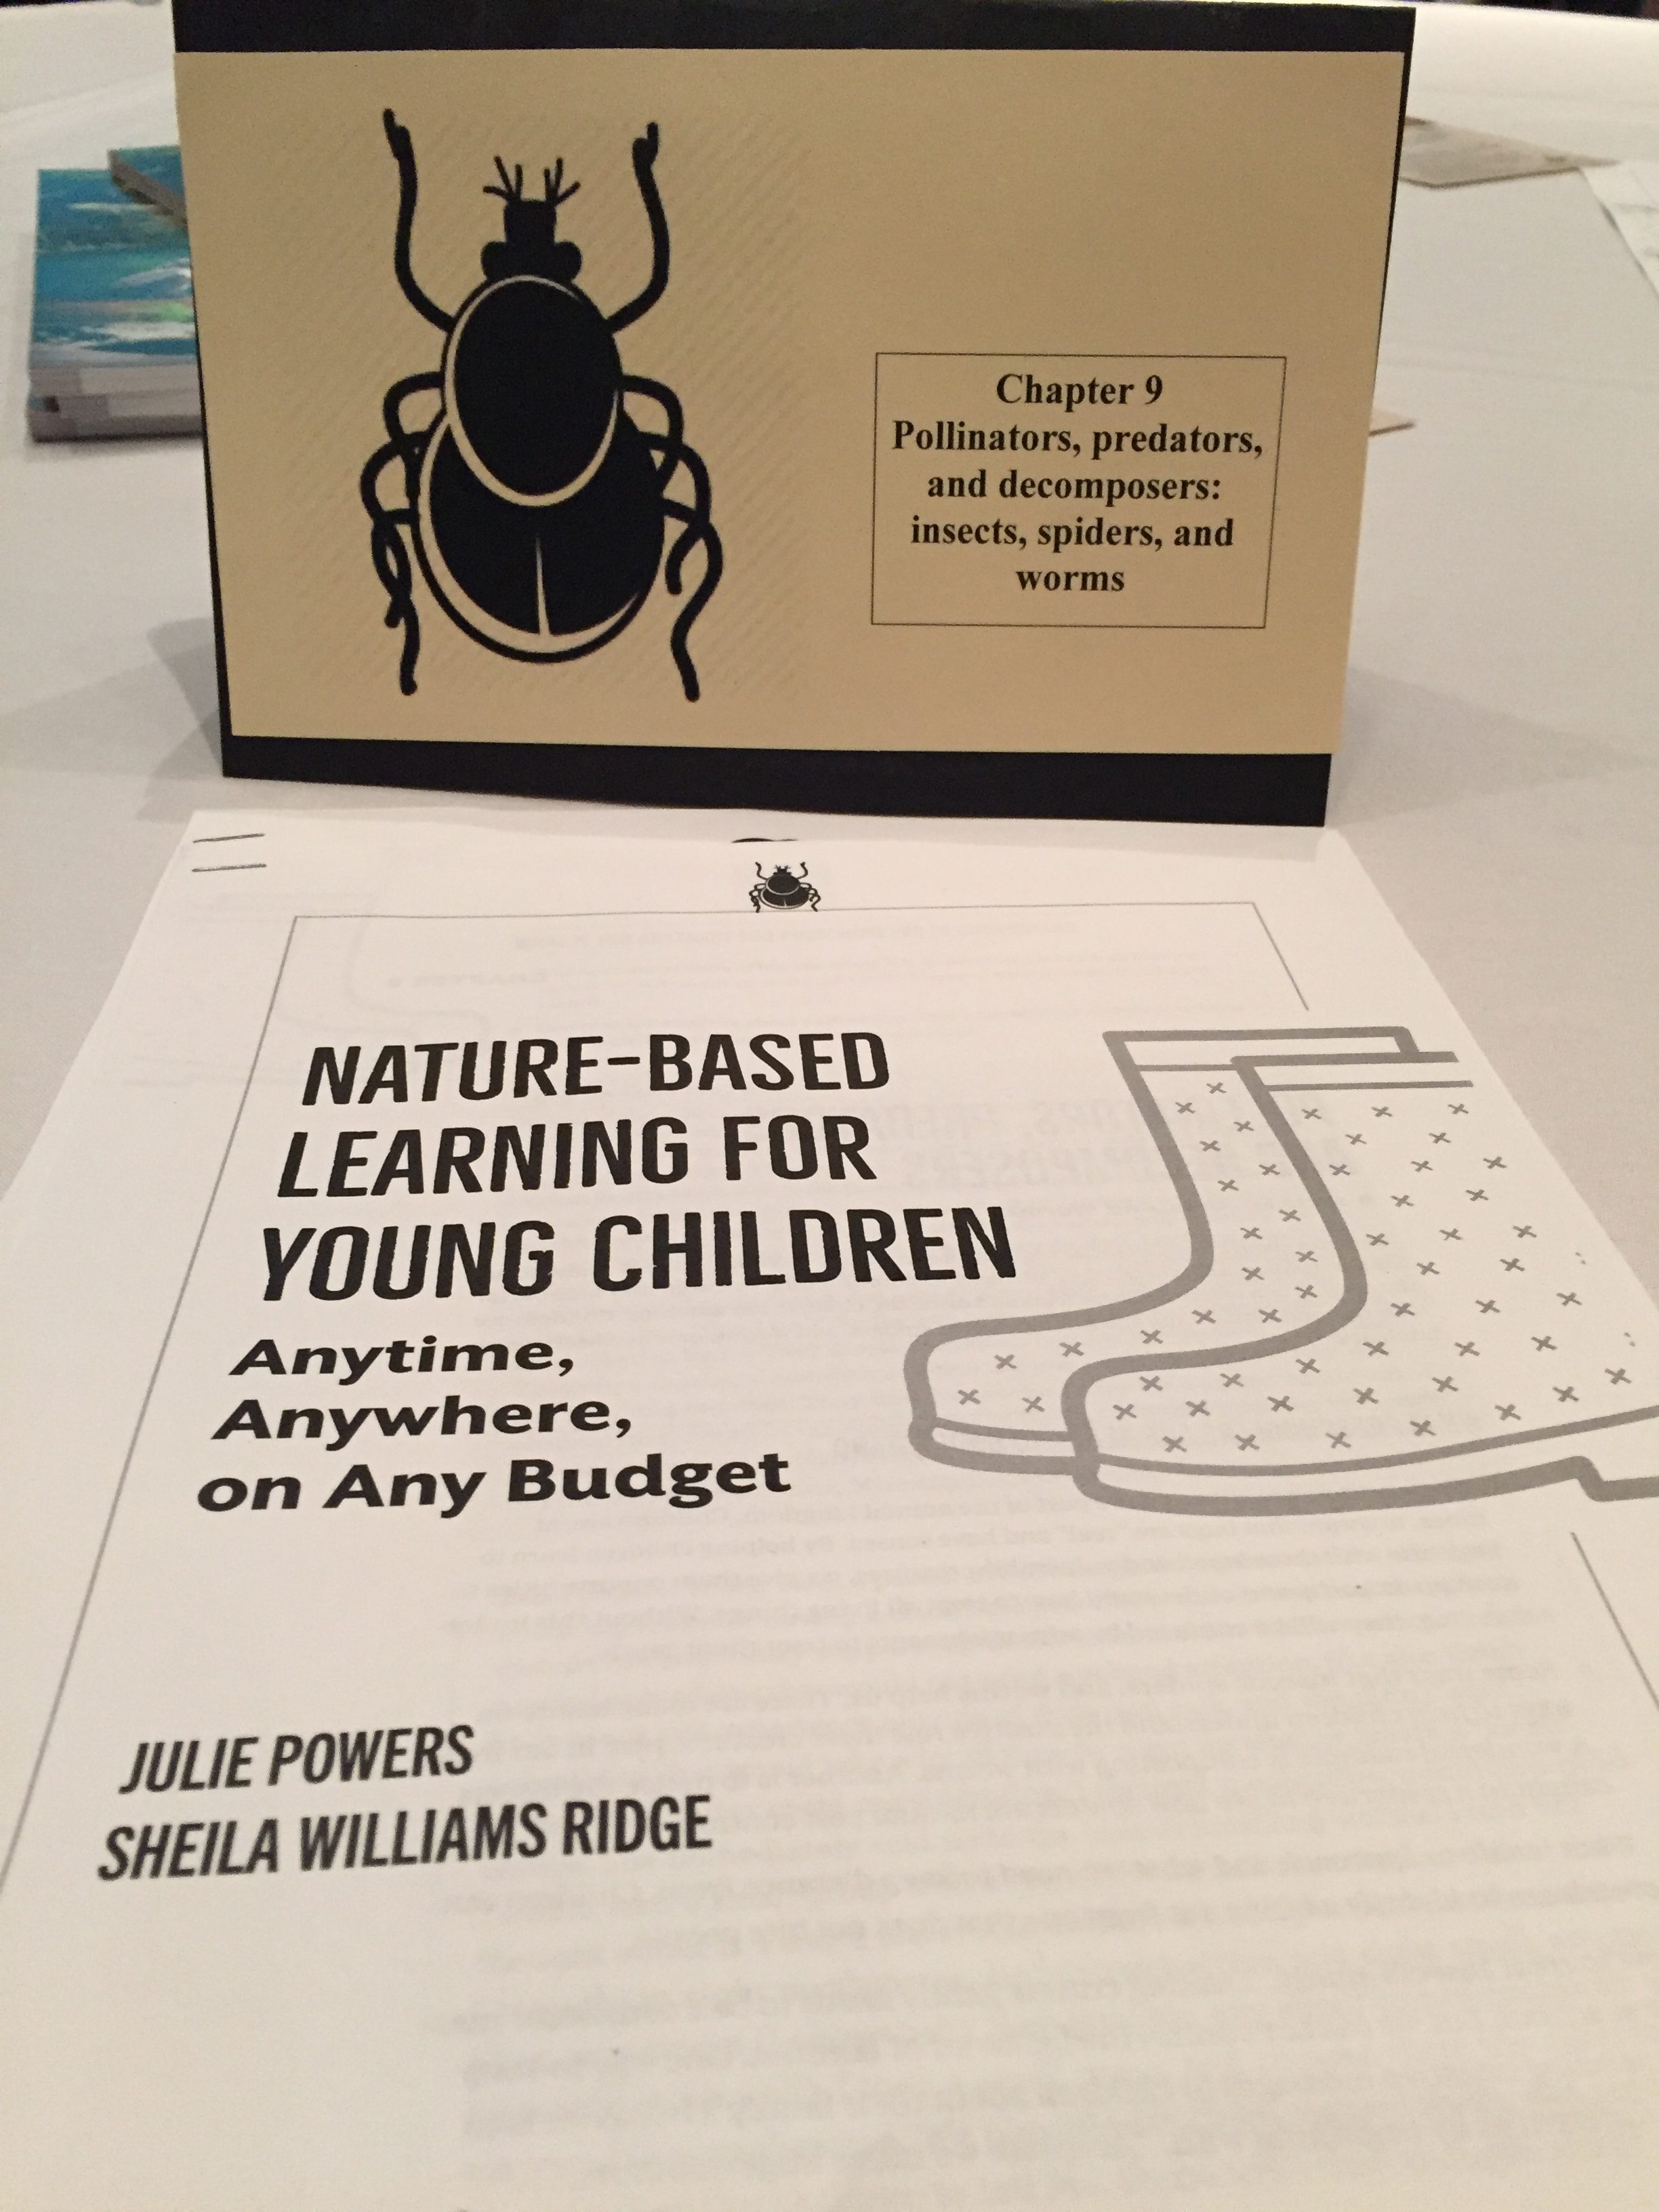 Handout cover from session on "Nature education: Start small or go big!"